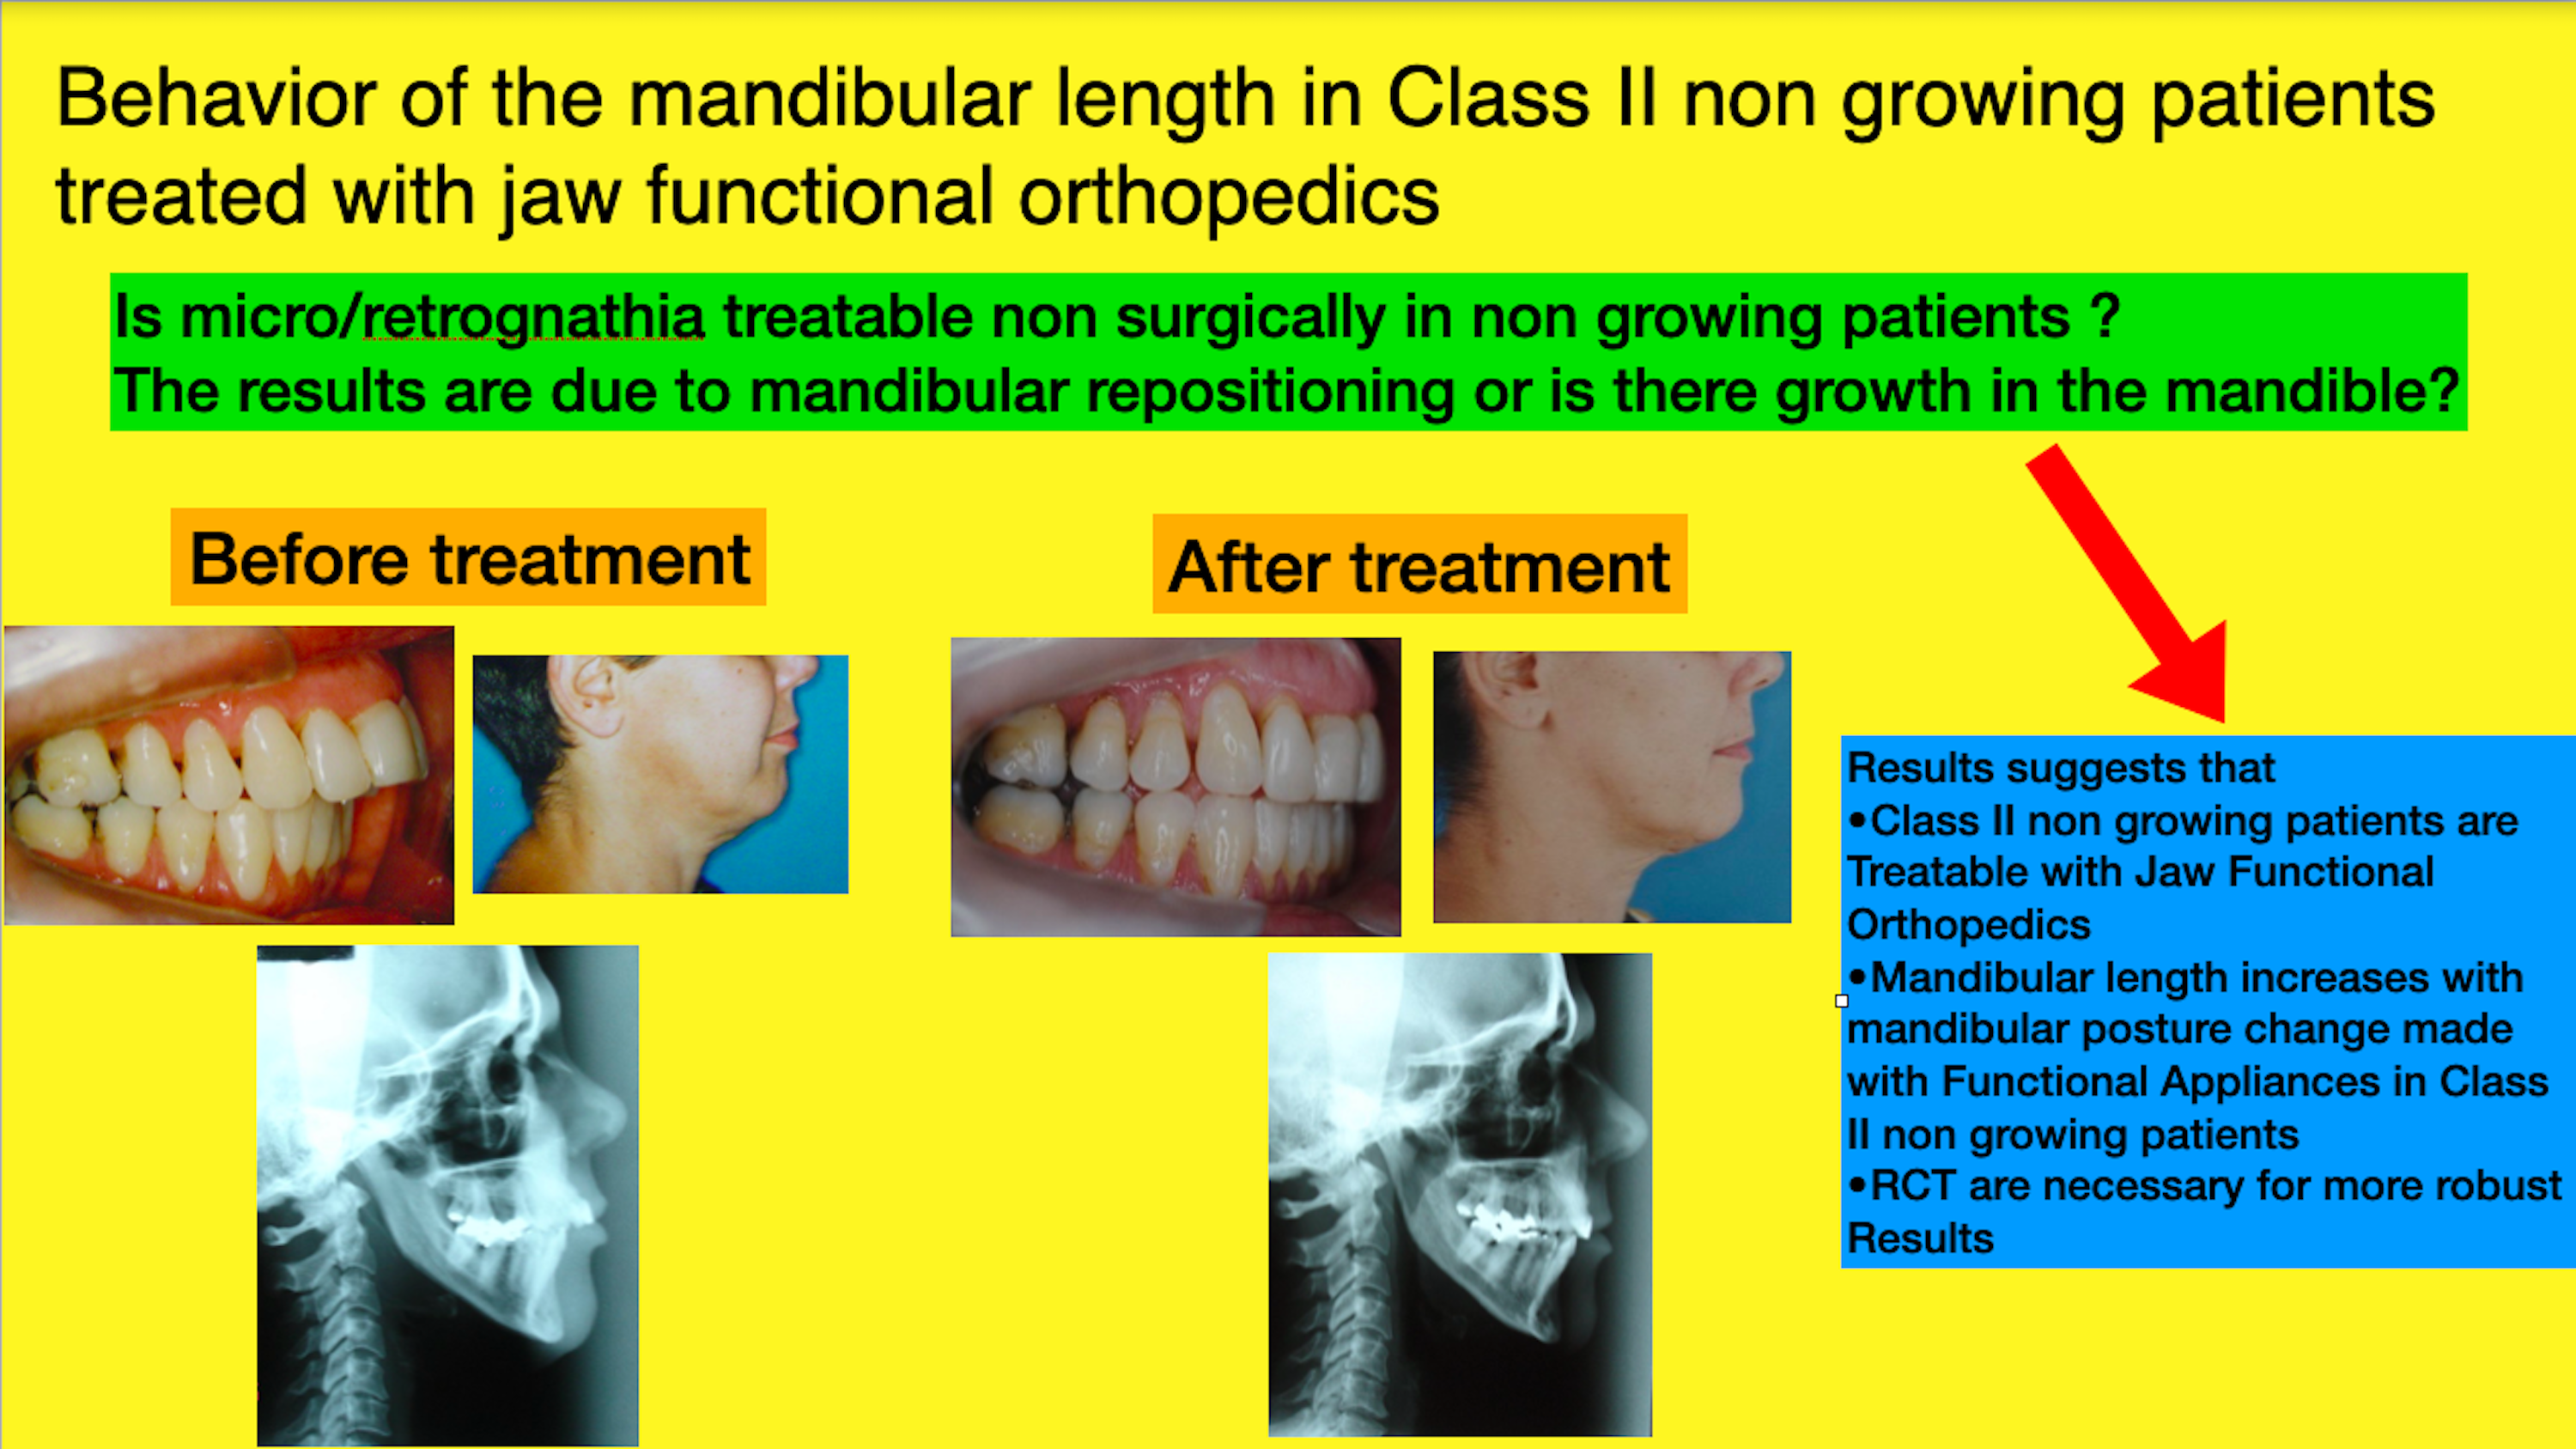 Behavior of the mandibular length in class II non-growing patients treated with jaw functional orthopedics